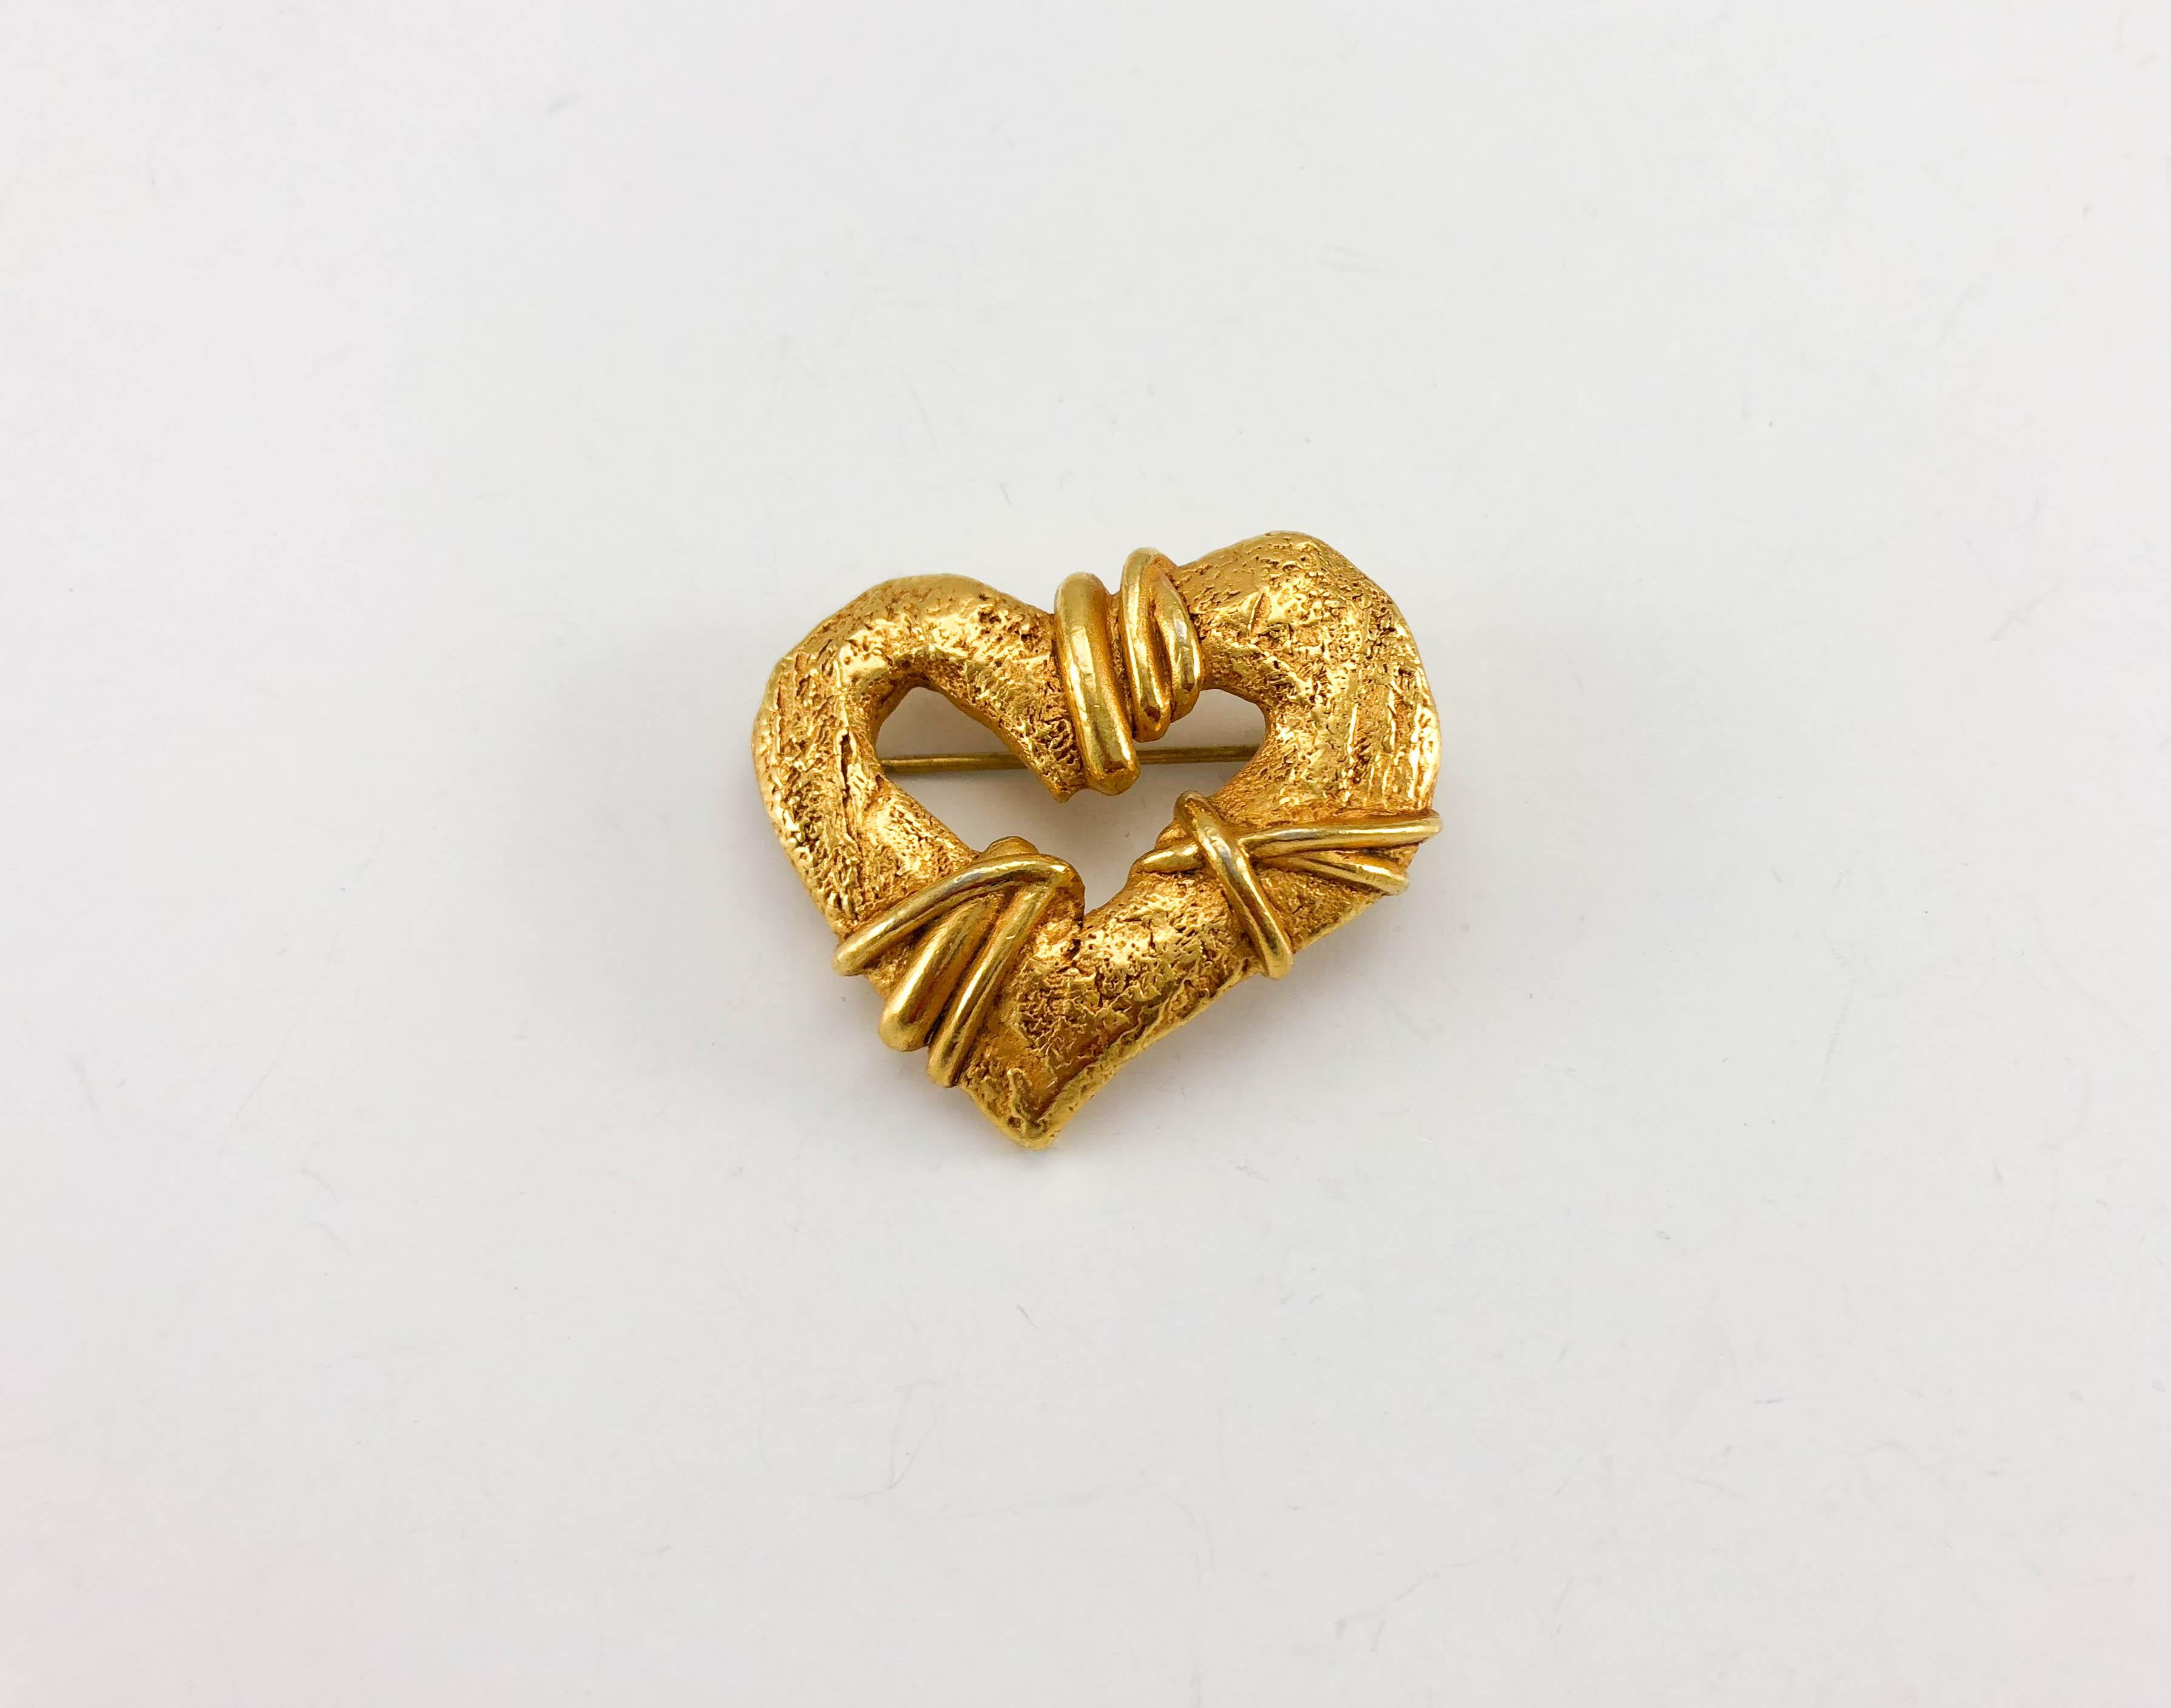 1994 Christian Lacroix Gold-Plated Heart Brooch, by Robert Goossens In Excellent Condition For Sale In London, Chelsea